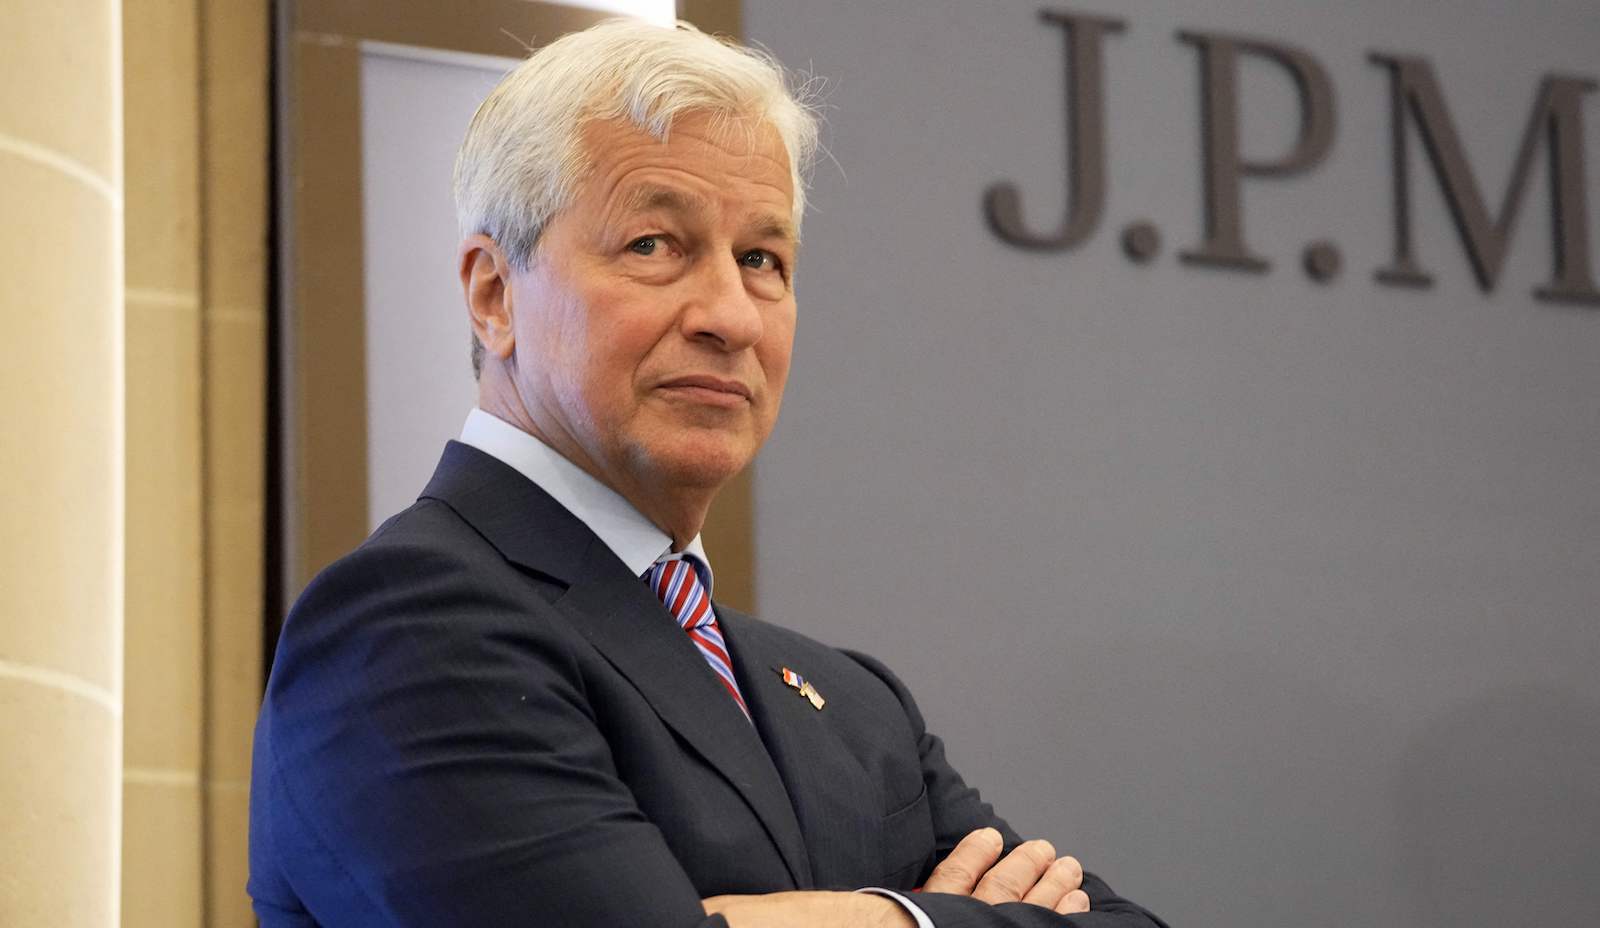 JPMorgan CEO Jamie Dimon stands with his arms cross